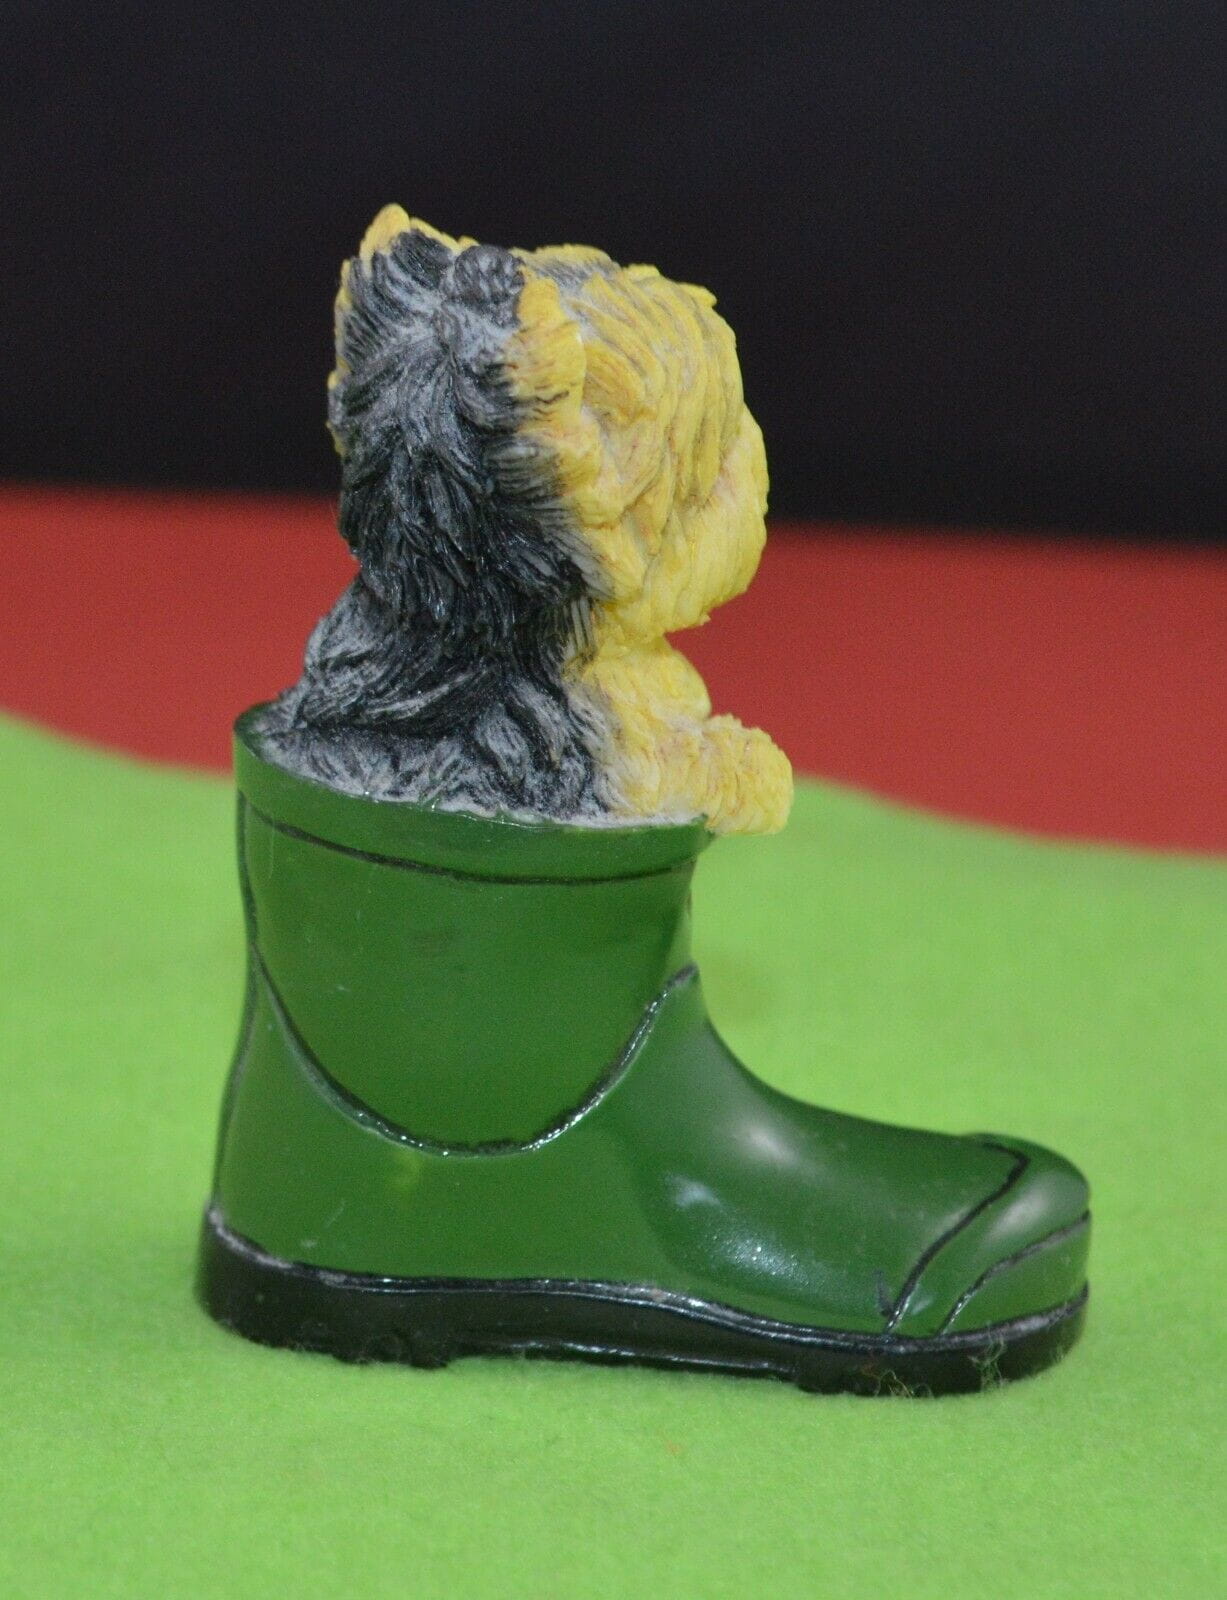 MINIATURE CAT IN A GREEN WELLY & MINIATURE DOG IN A GREEN WELLY - TMD167207